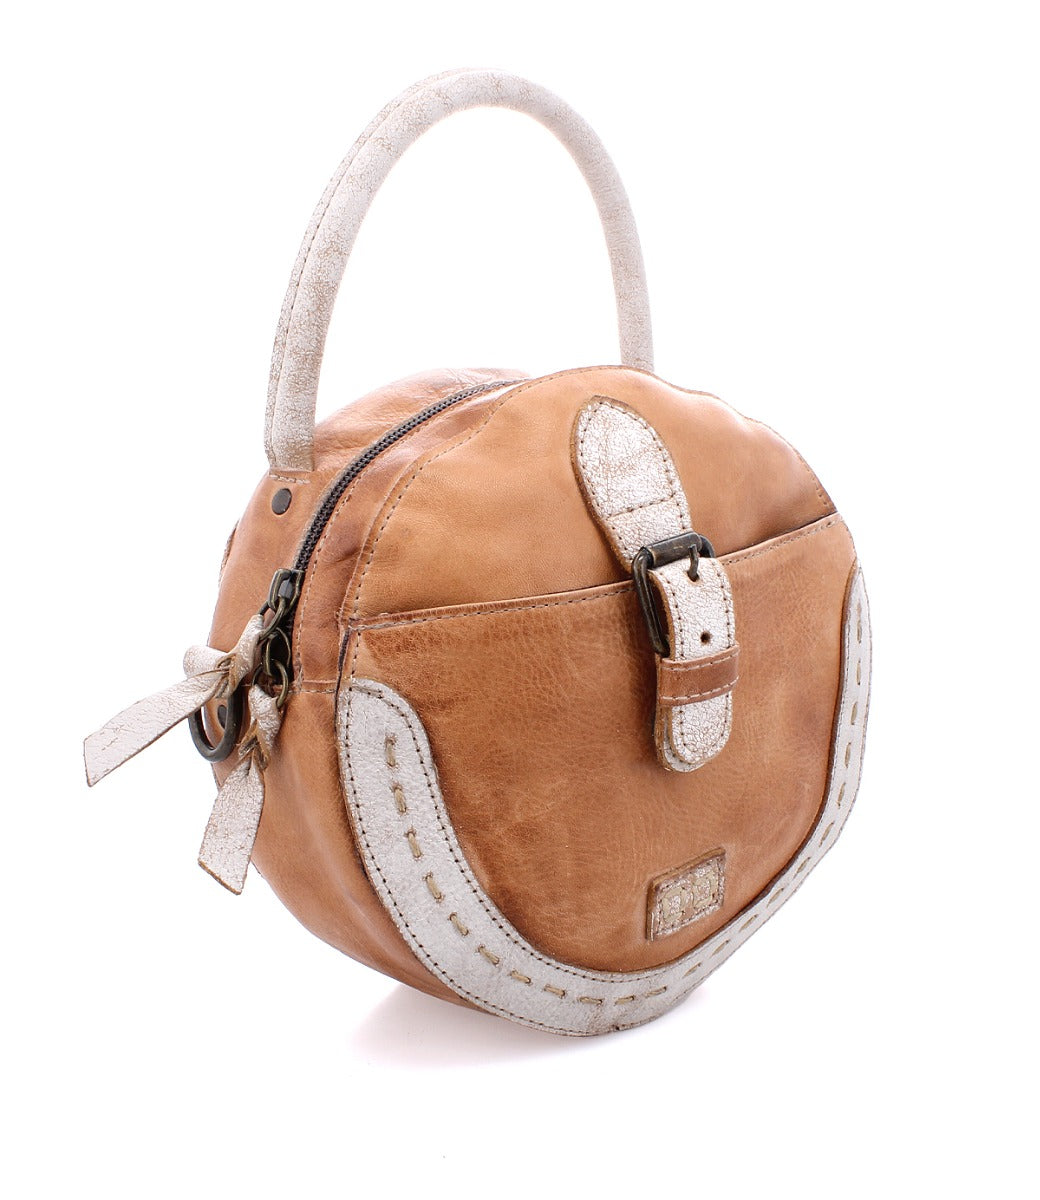 An Arenfield tan and white leather handbag with a strap by Bed Stu.